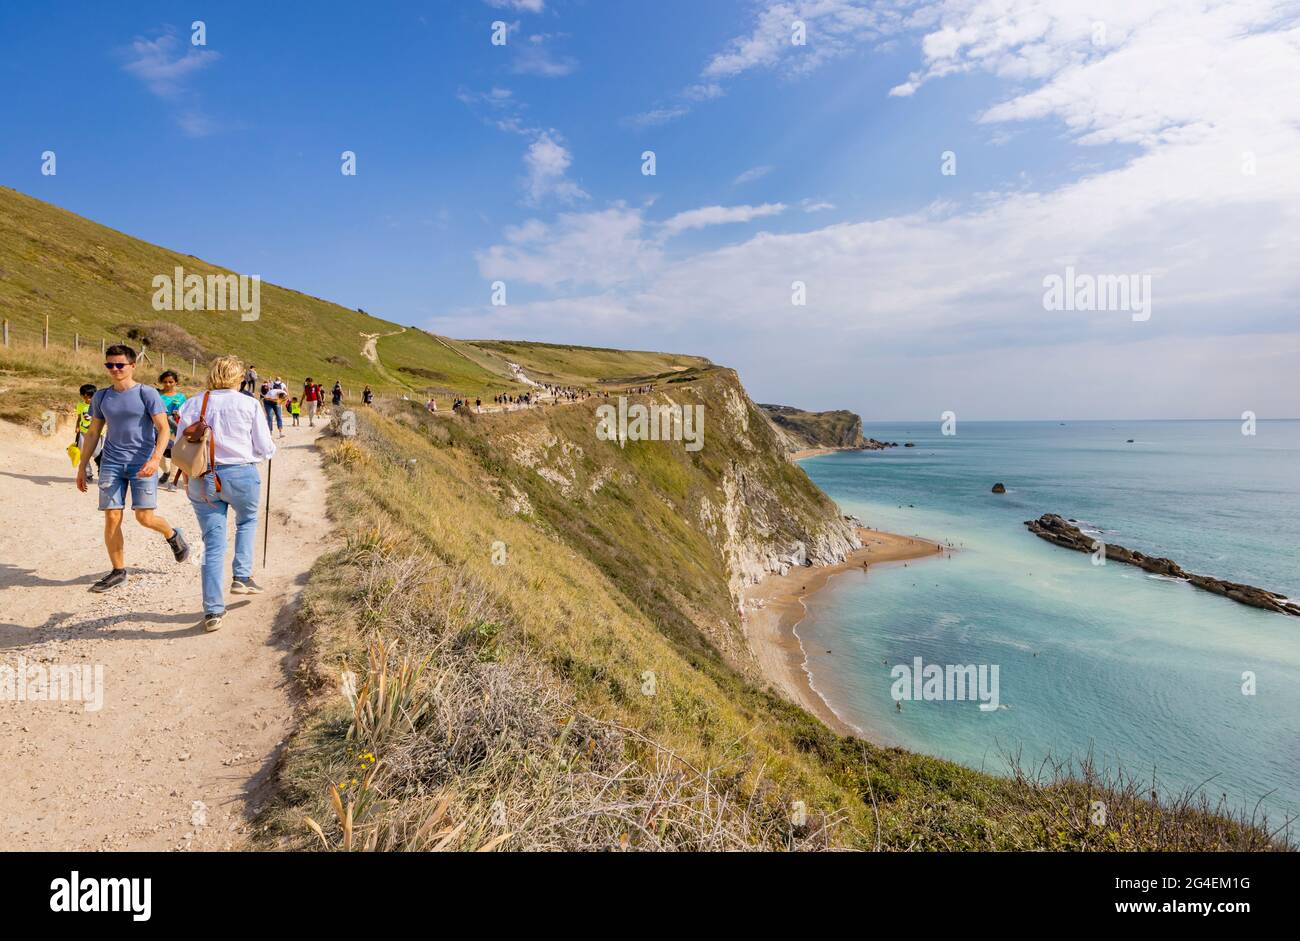 Panoramic coastal clifftop view of Man O'War Bay on the picturesque Jurassic Coast World Heritage site coastline at Durdle Door in Dorset, SW England Stock Photo